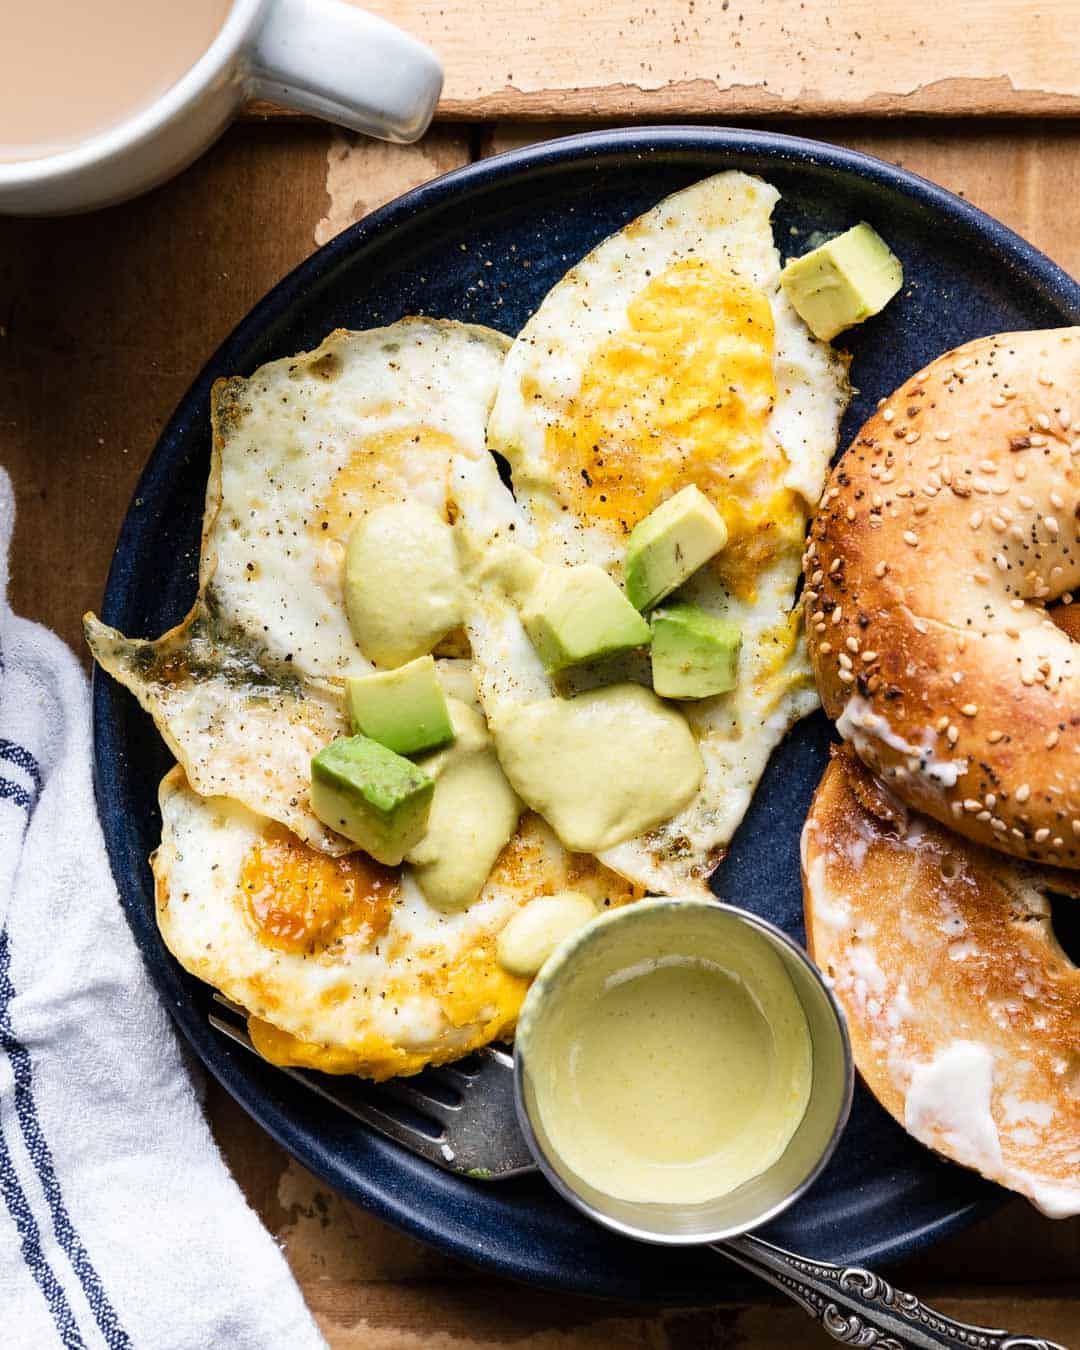 Fried eggs over hard with avocado, hot sauce, and a bagel.